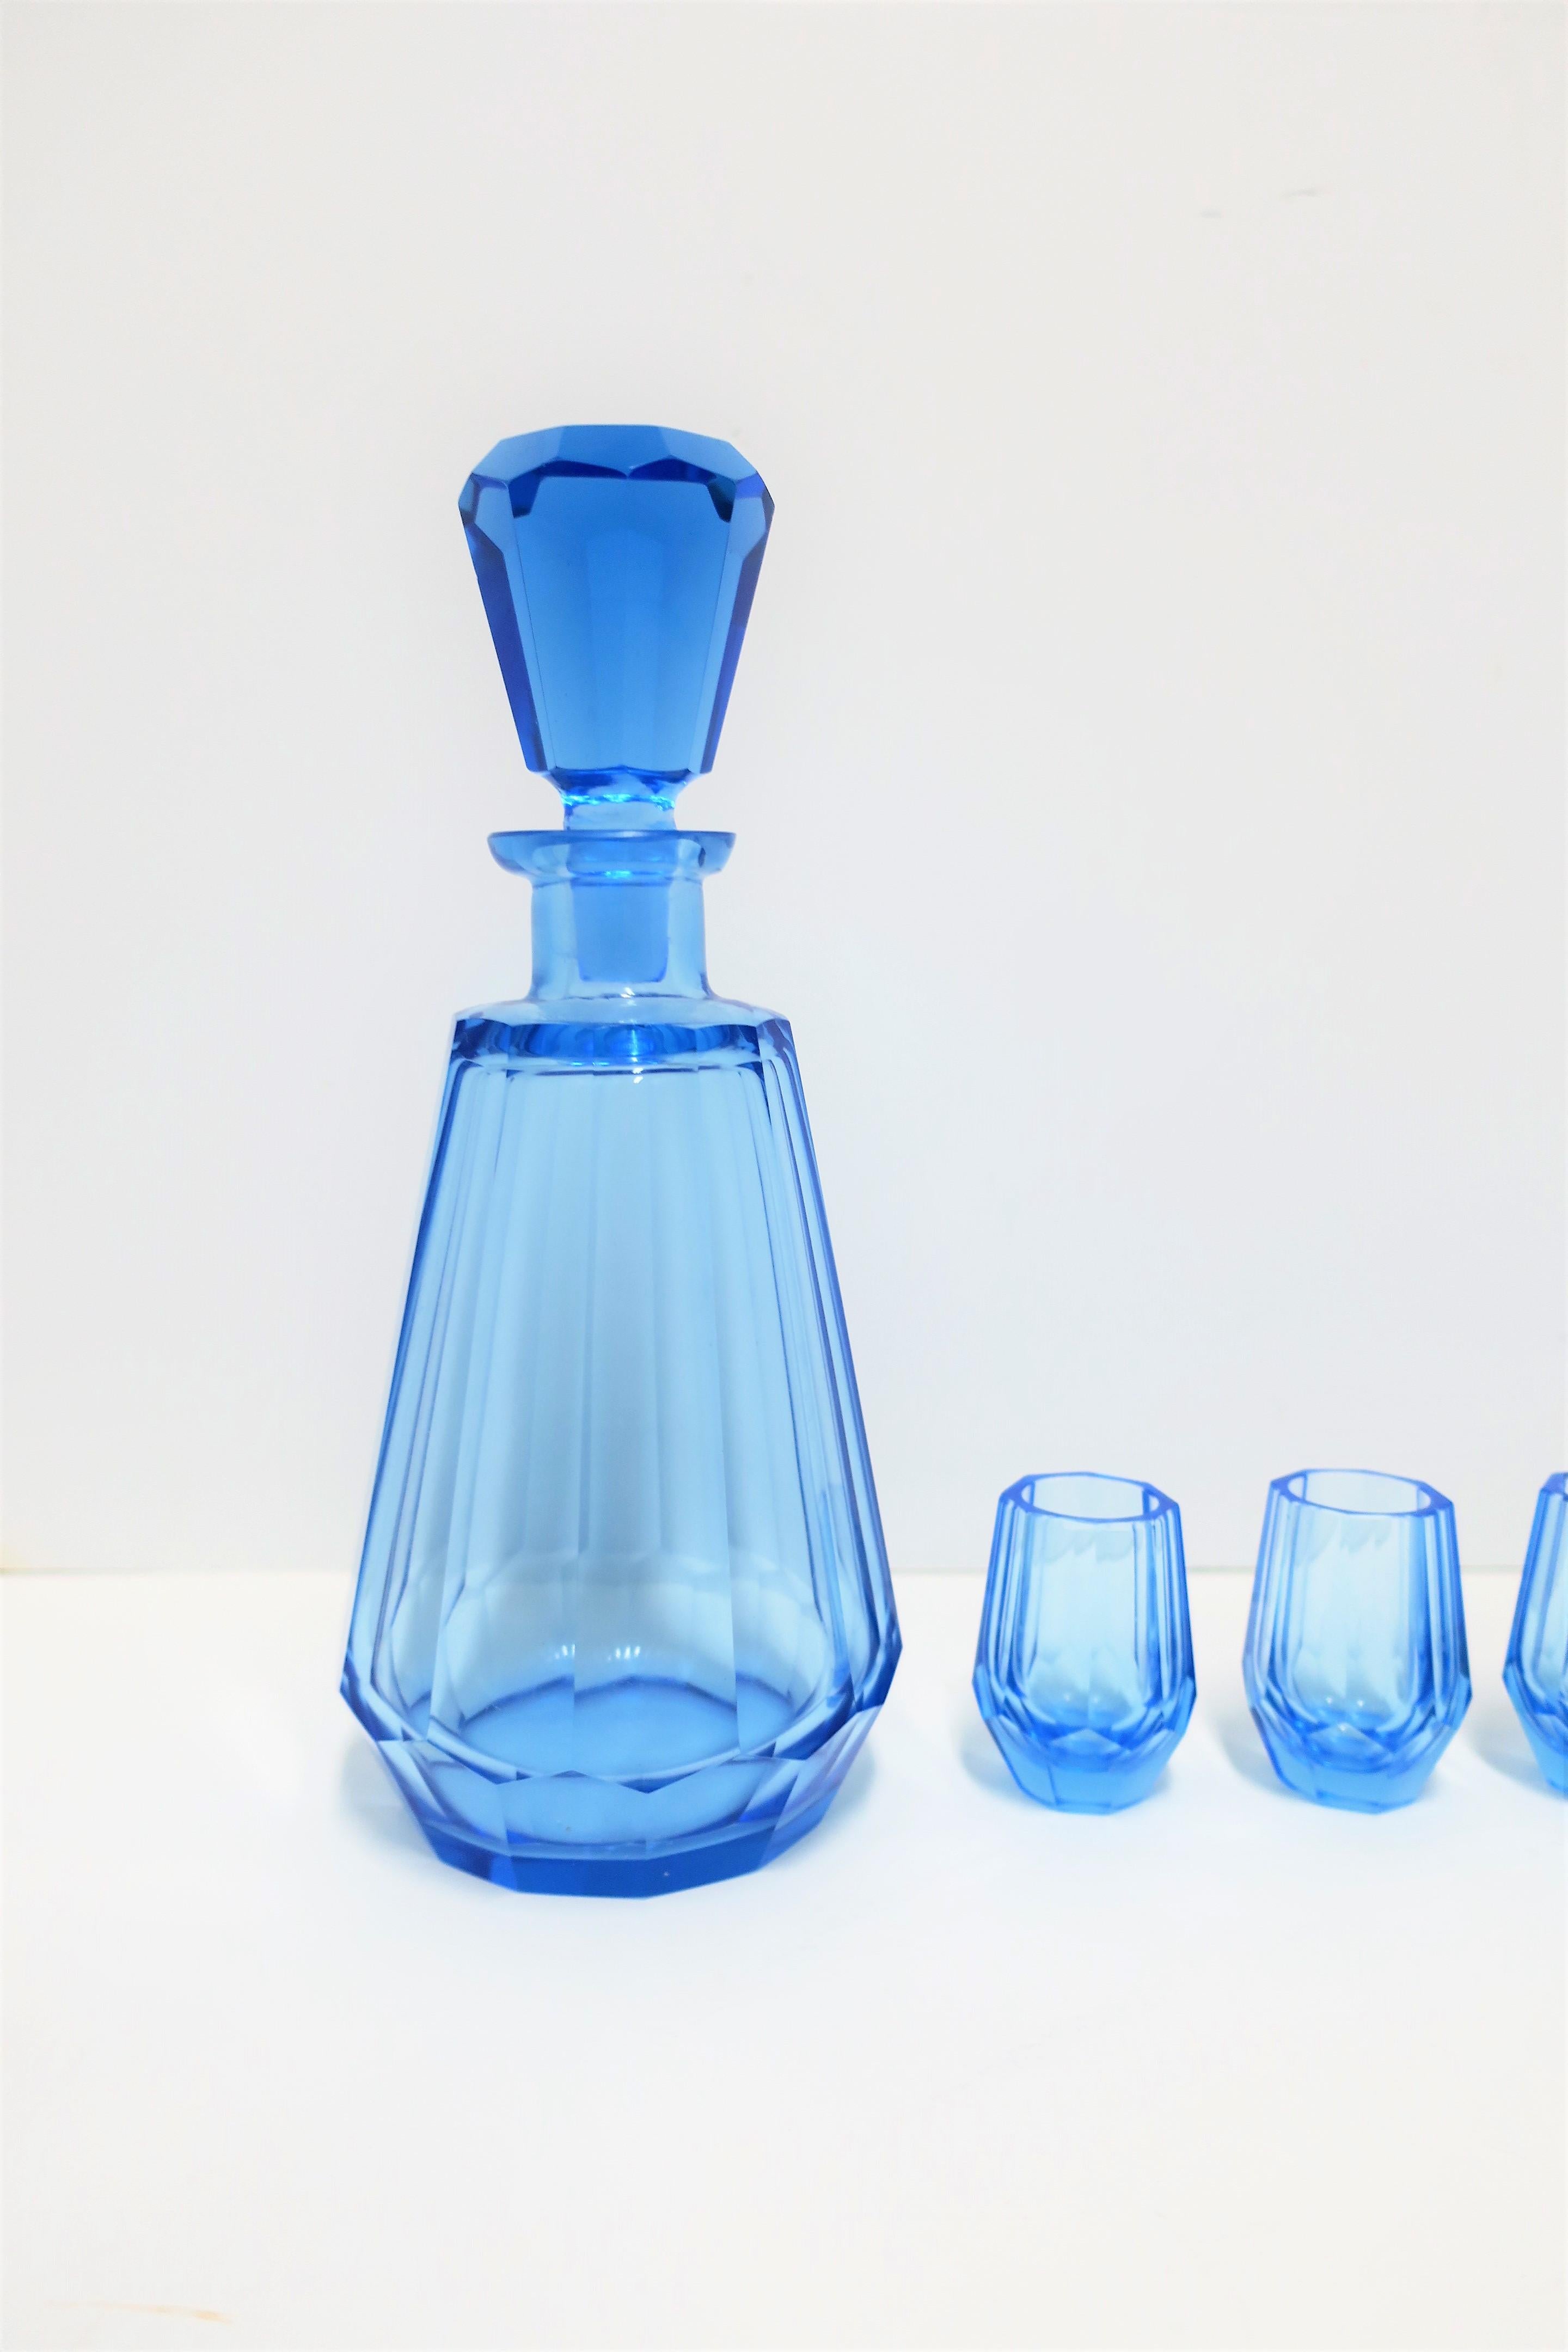 European Blue Crystal Liquor or Spirits Decanter and Glasses after Moser In Good Condition In New York, NY